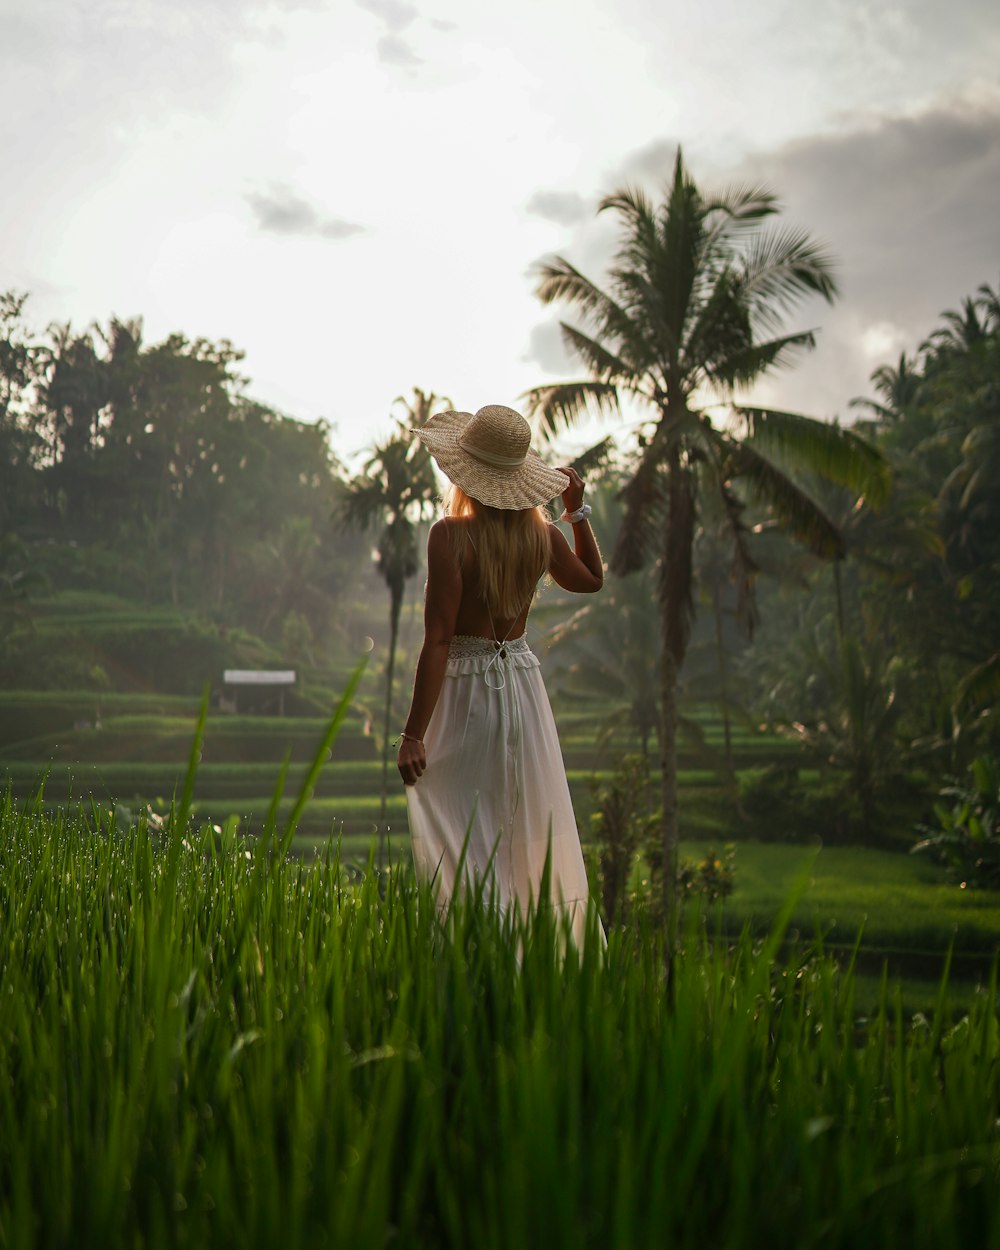 a woman in a white dress and hat walking through a lush green field